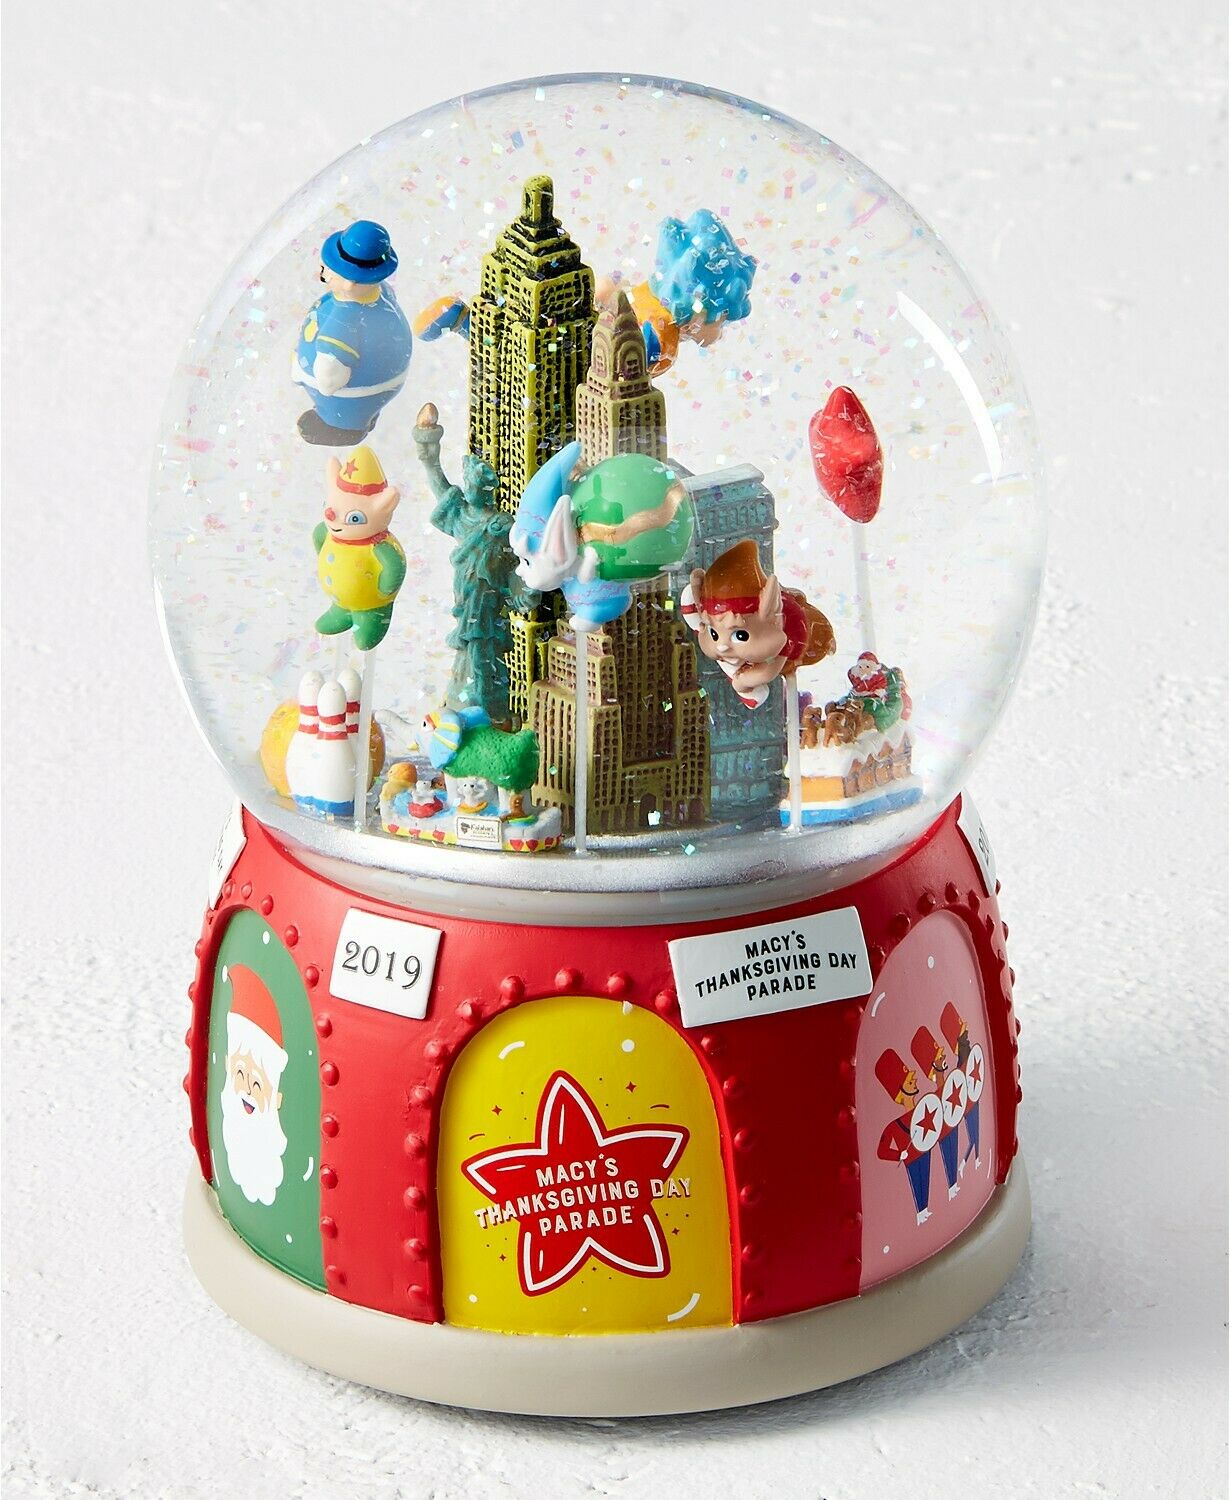 Limited Edition Exclusive Macys Thanksgiving Day Parade 2019 Musical Snow Globe